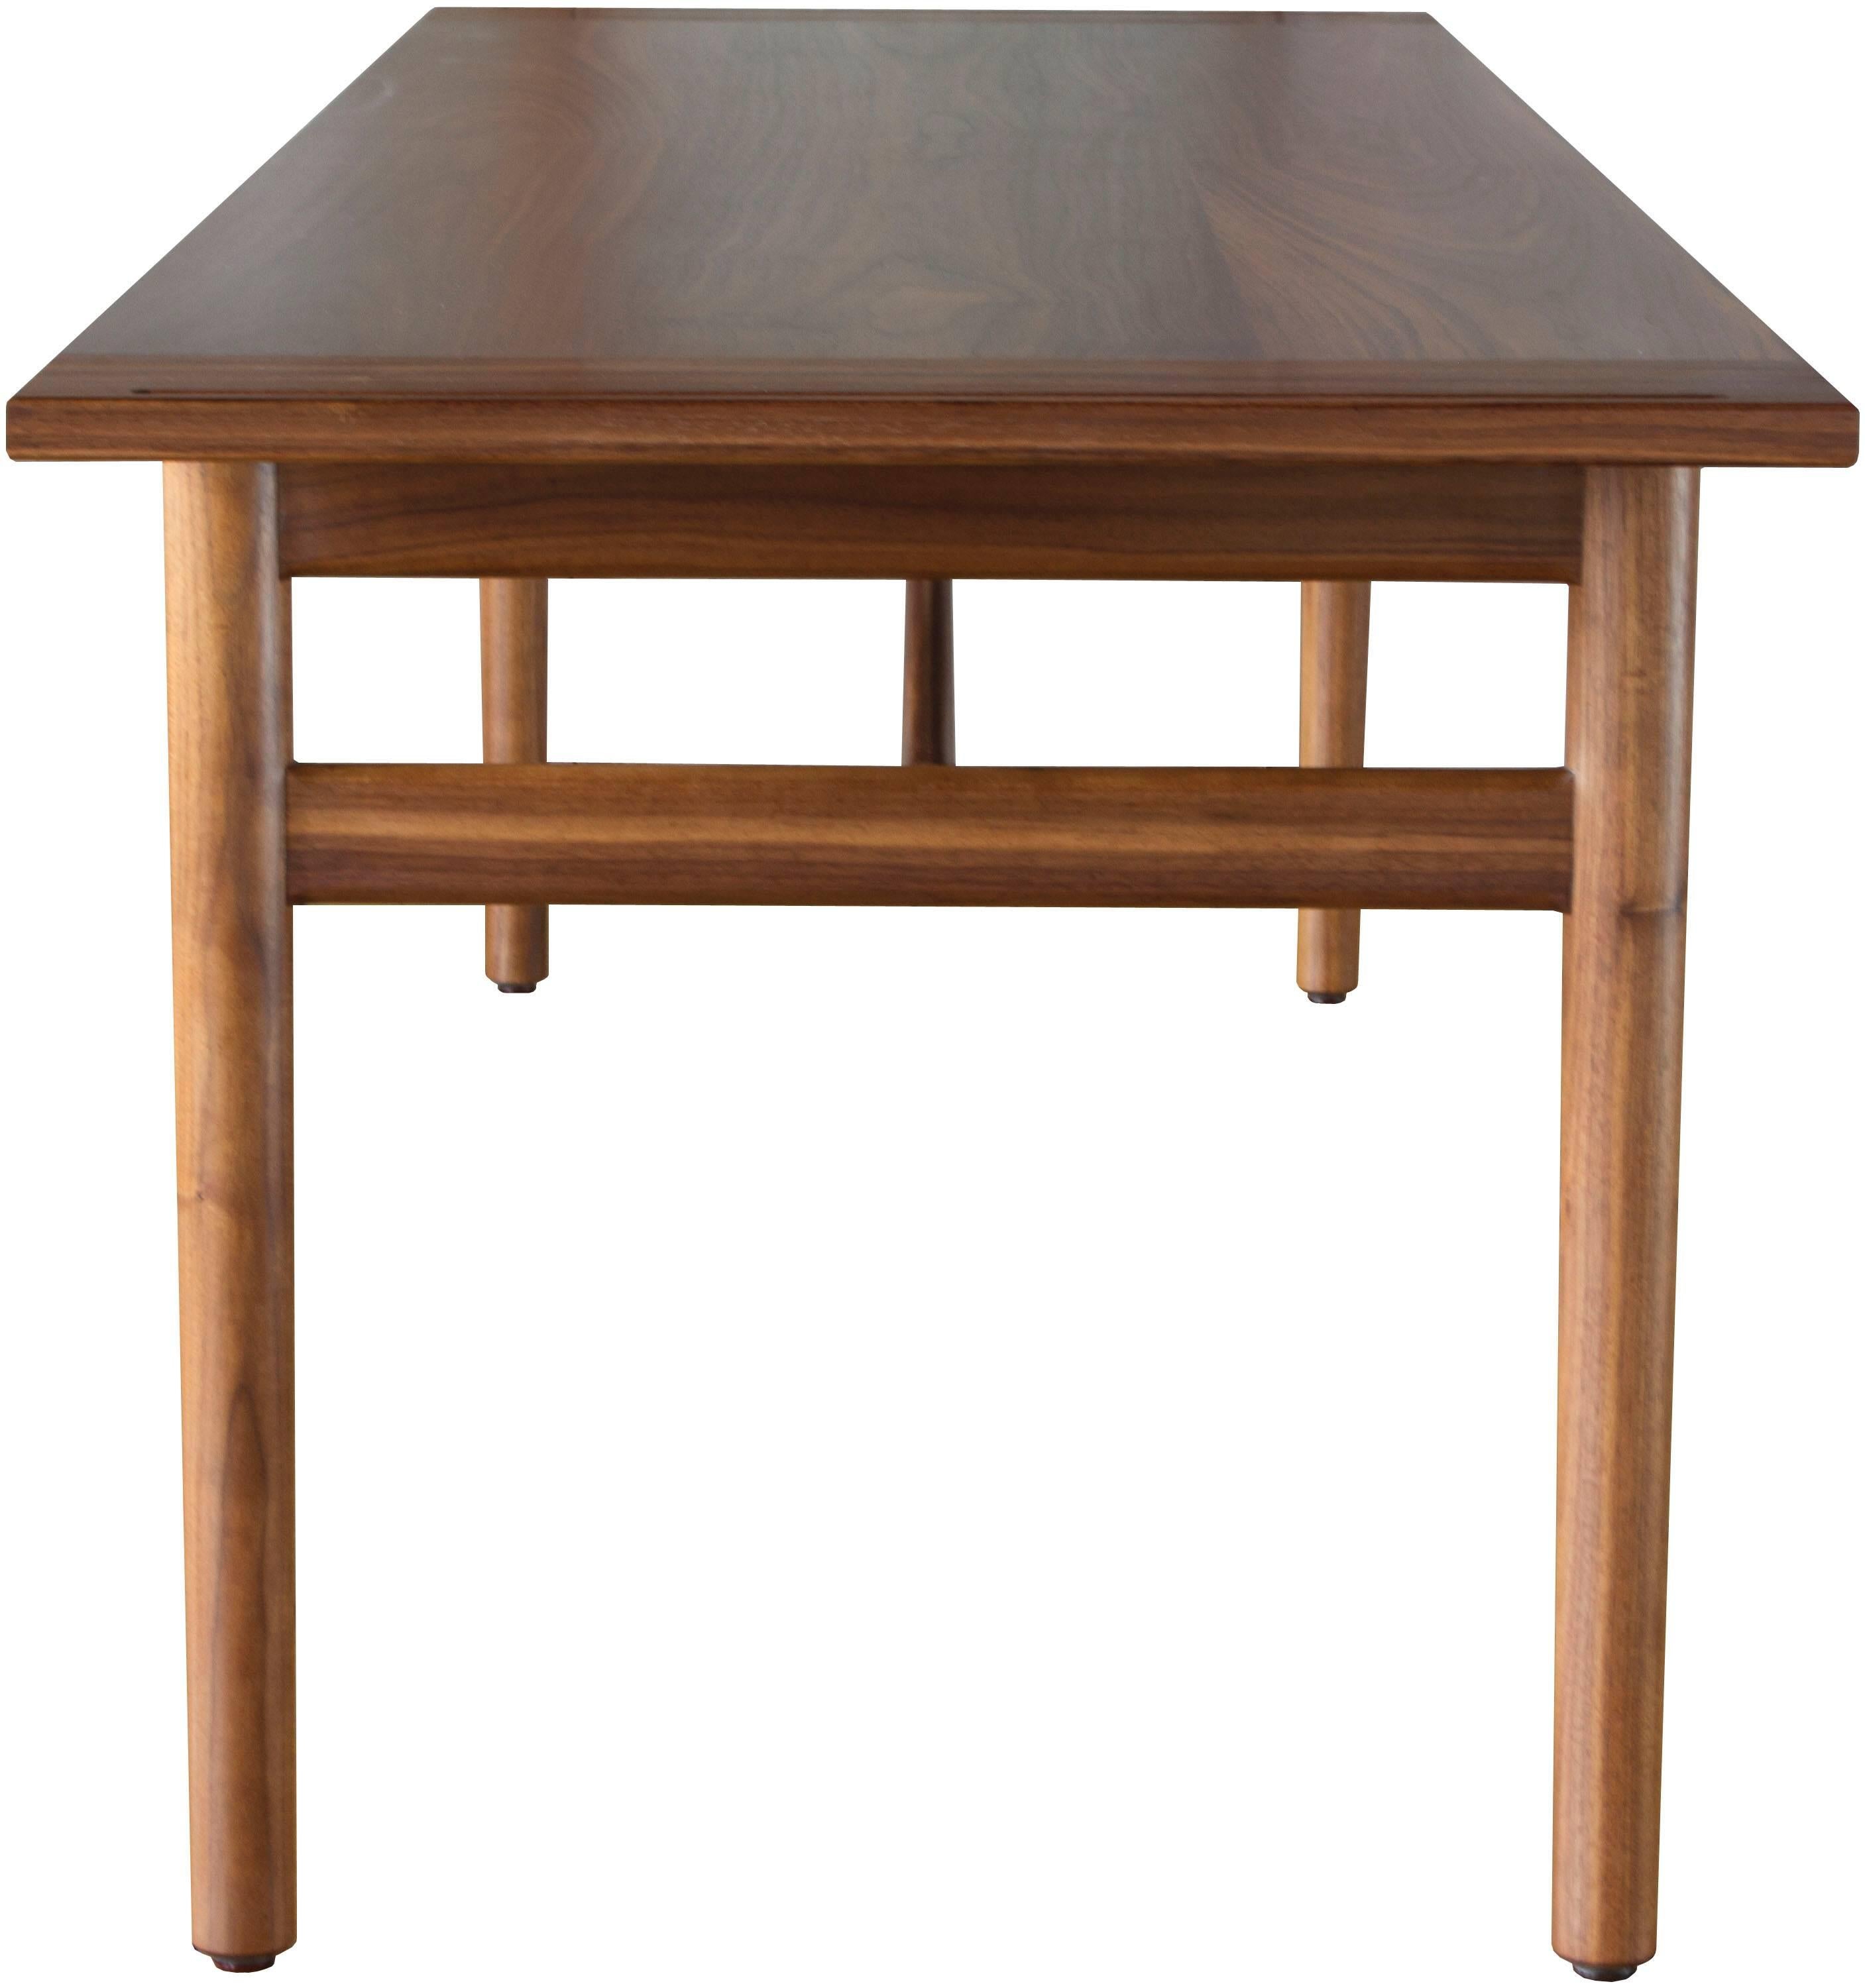 American Silbrook Table in Oiled Walnut - handcrafted by Richard Wrightman Design